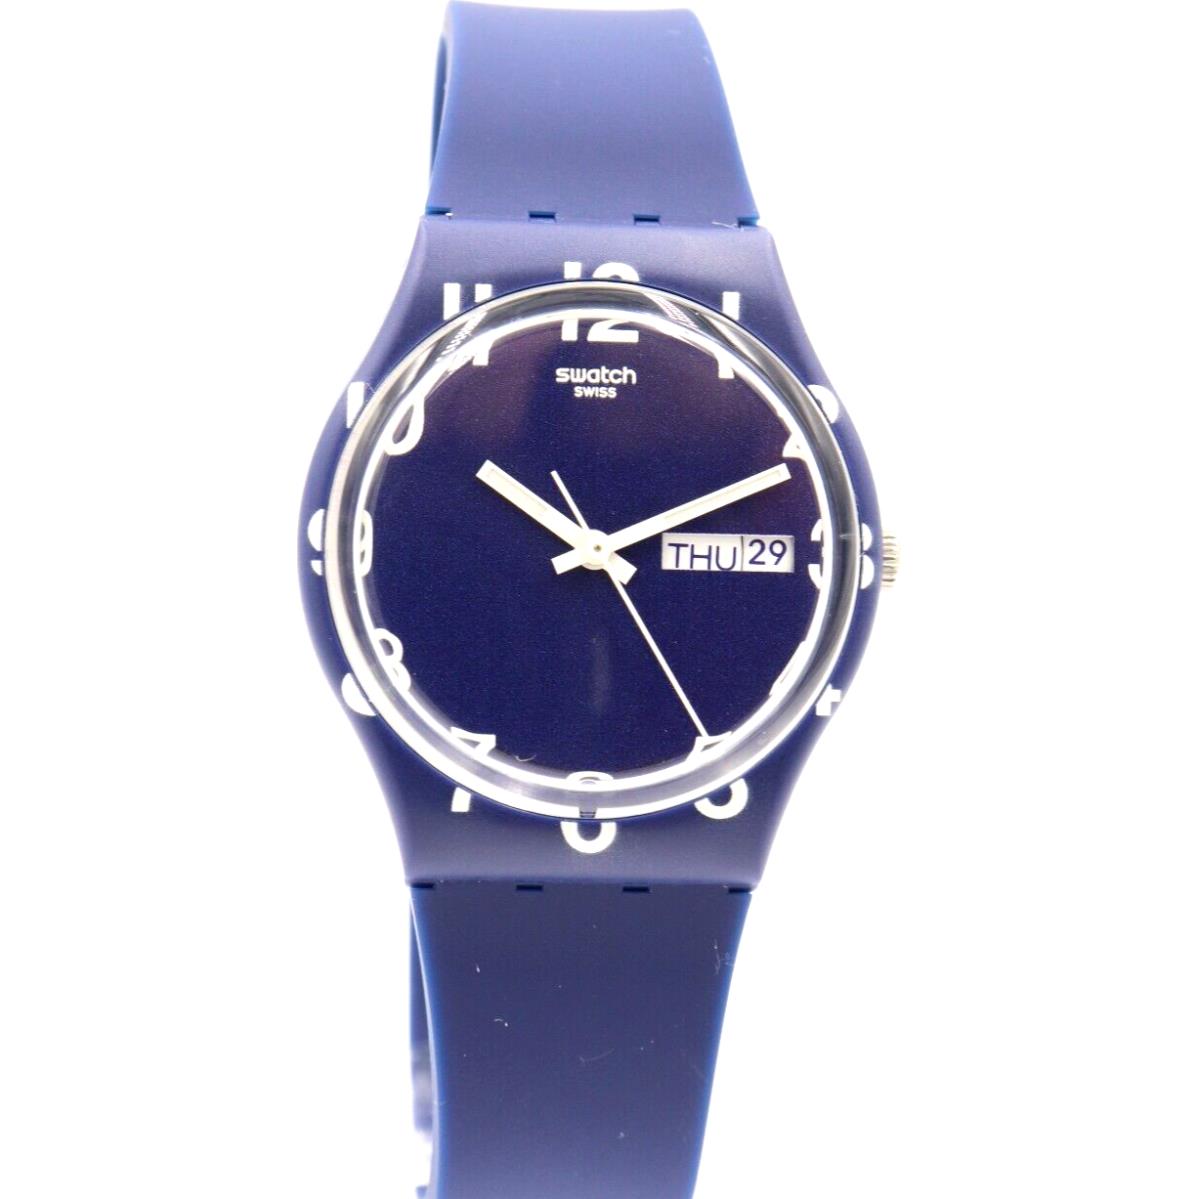 Swiss Swatch Originals Over Blue Silicone Day-date Watch 34mm GN726 - Dial: Blue, Band: Blue, Bezel: Blue